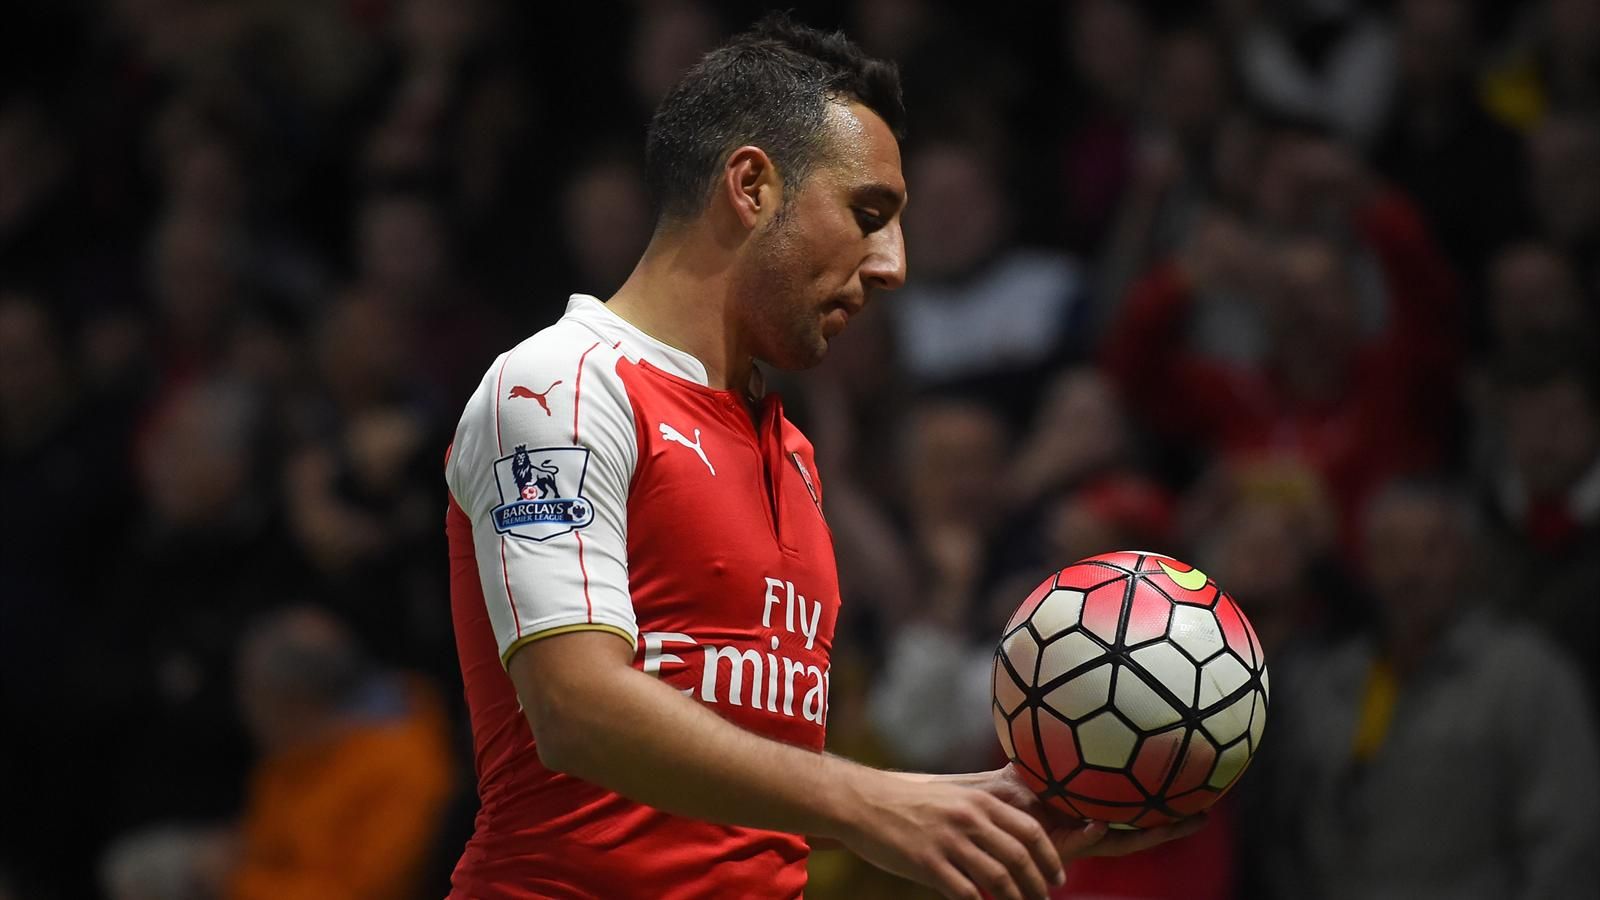 santi cazorla eager to extend stay at arsenal